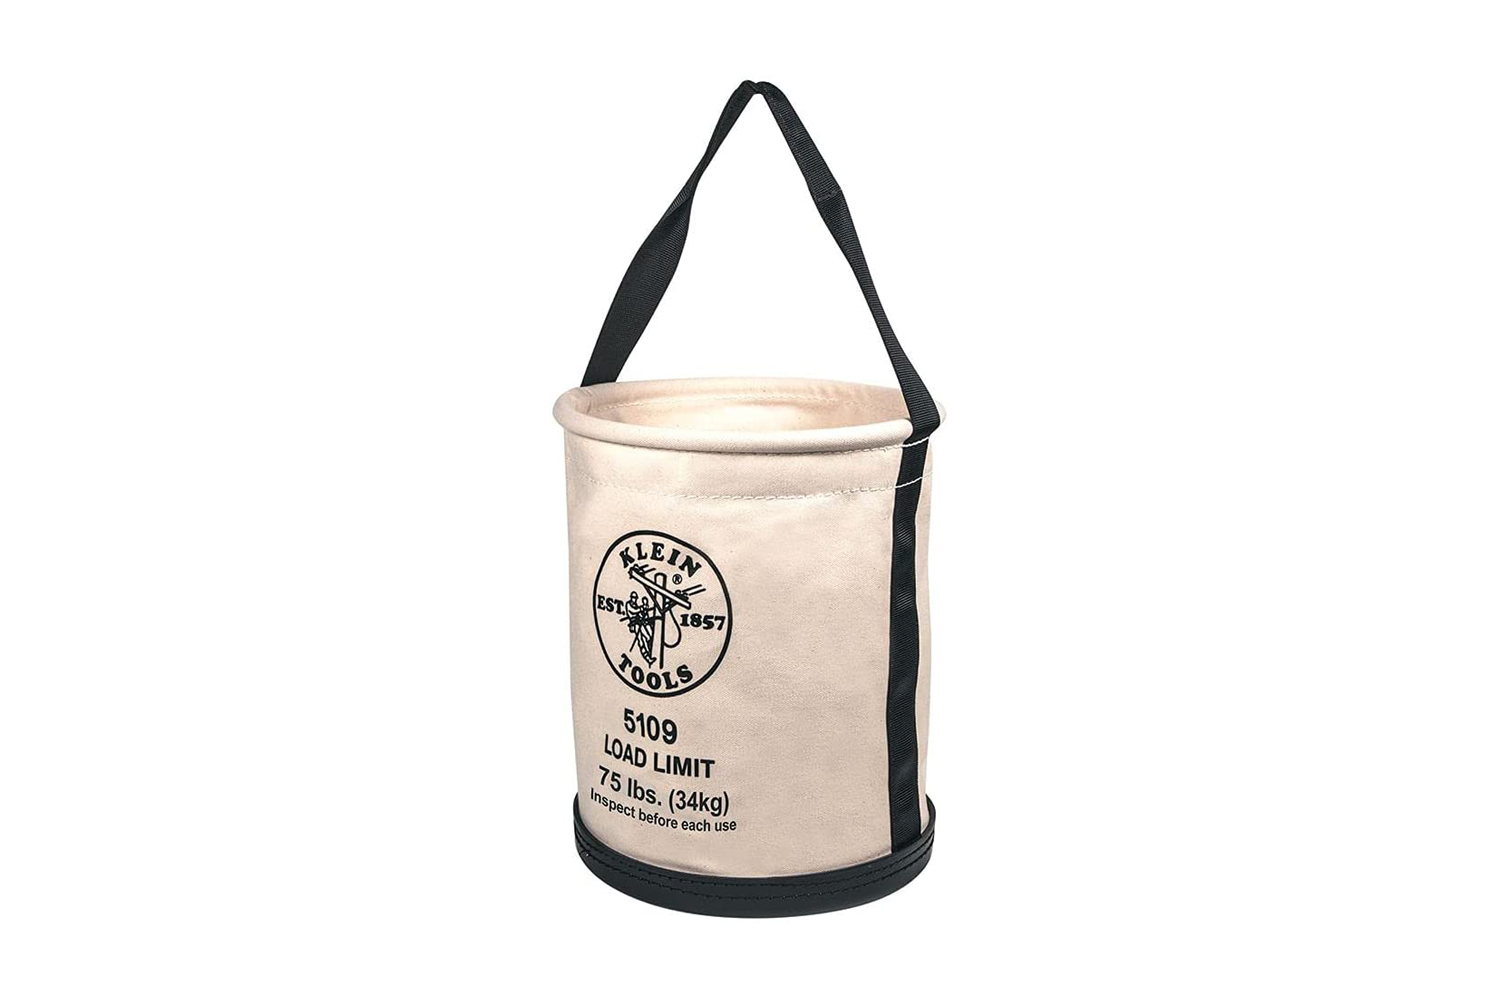 the handy klein tools canvas bucket is made of number six canvas with a black m 12